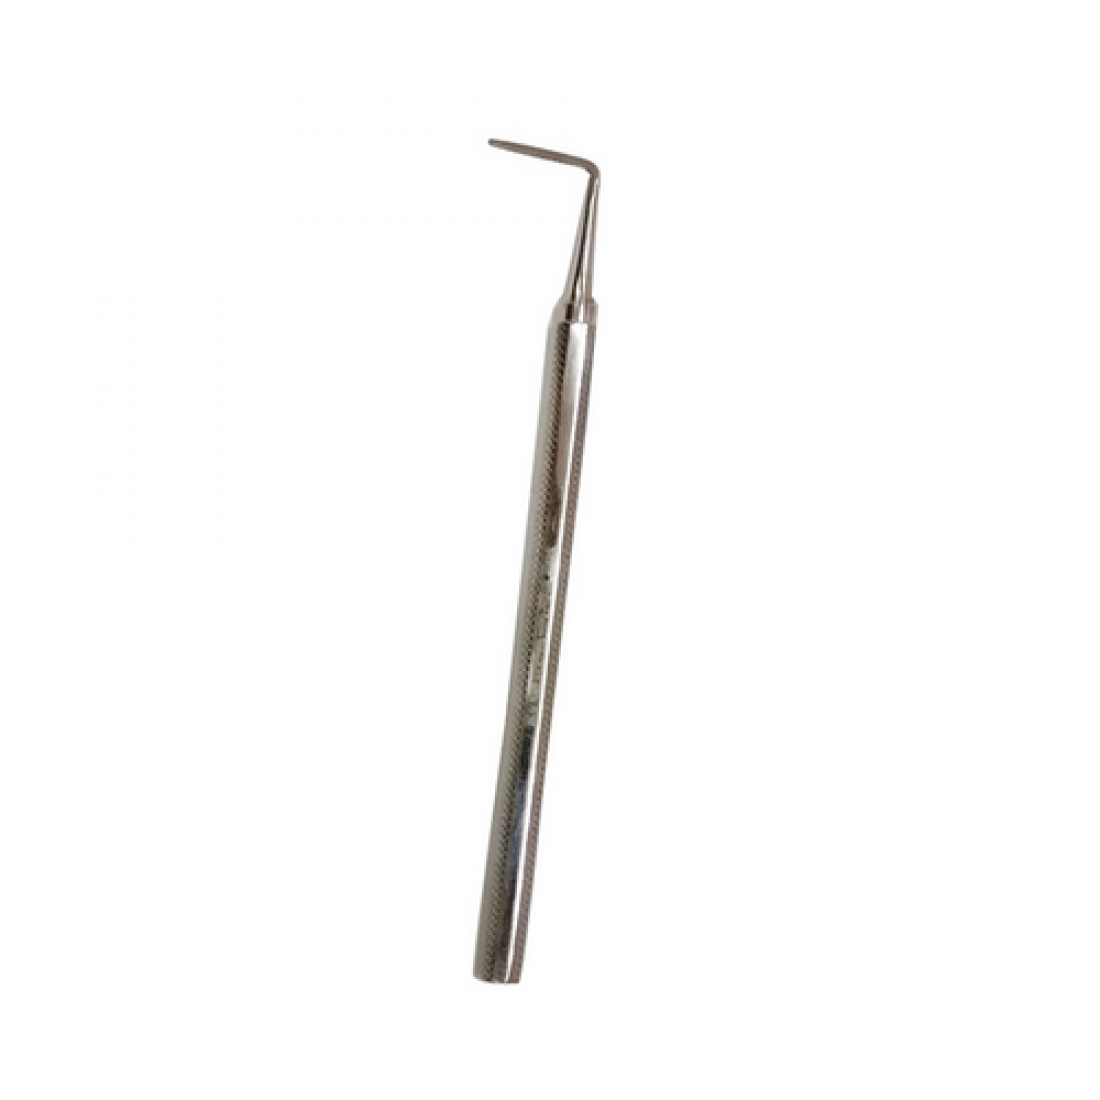 Buy Dental Moon s Probe Indian Online at Lowest Best Price